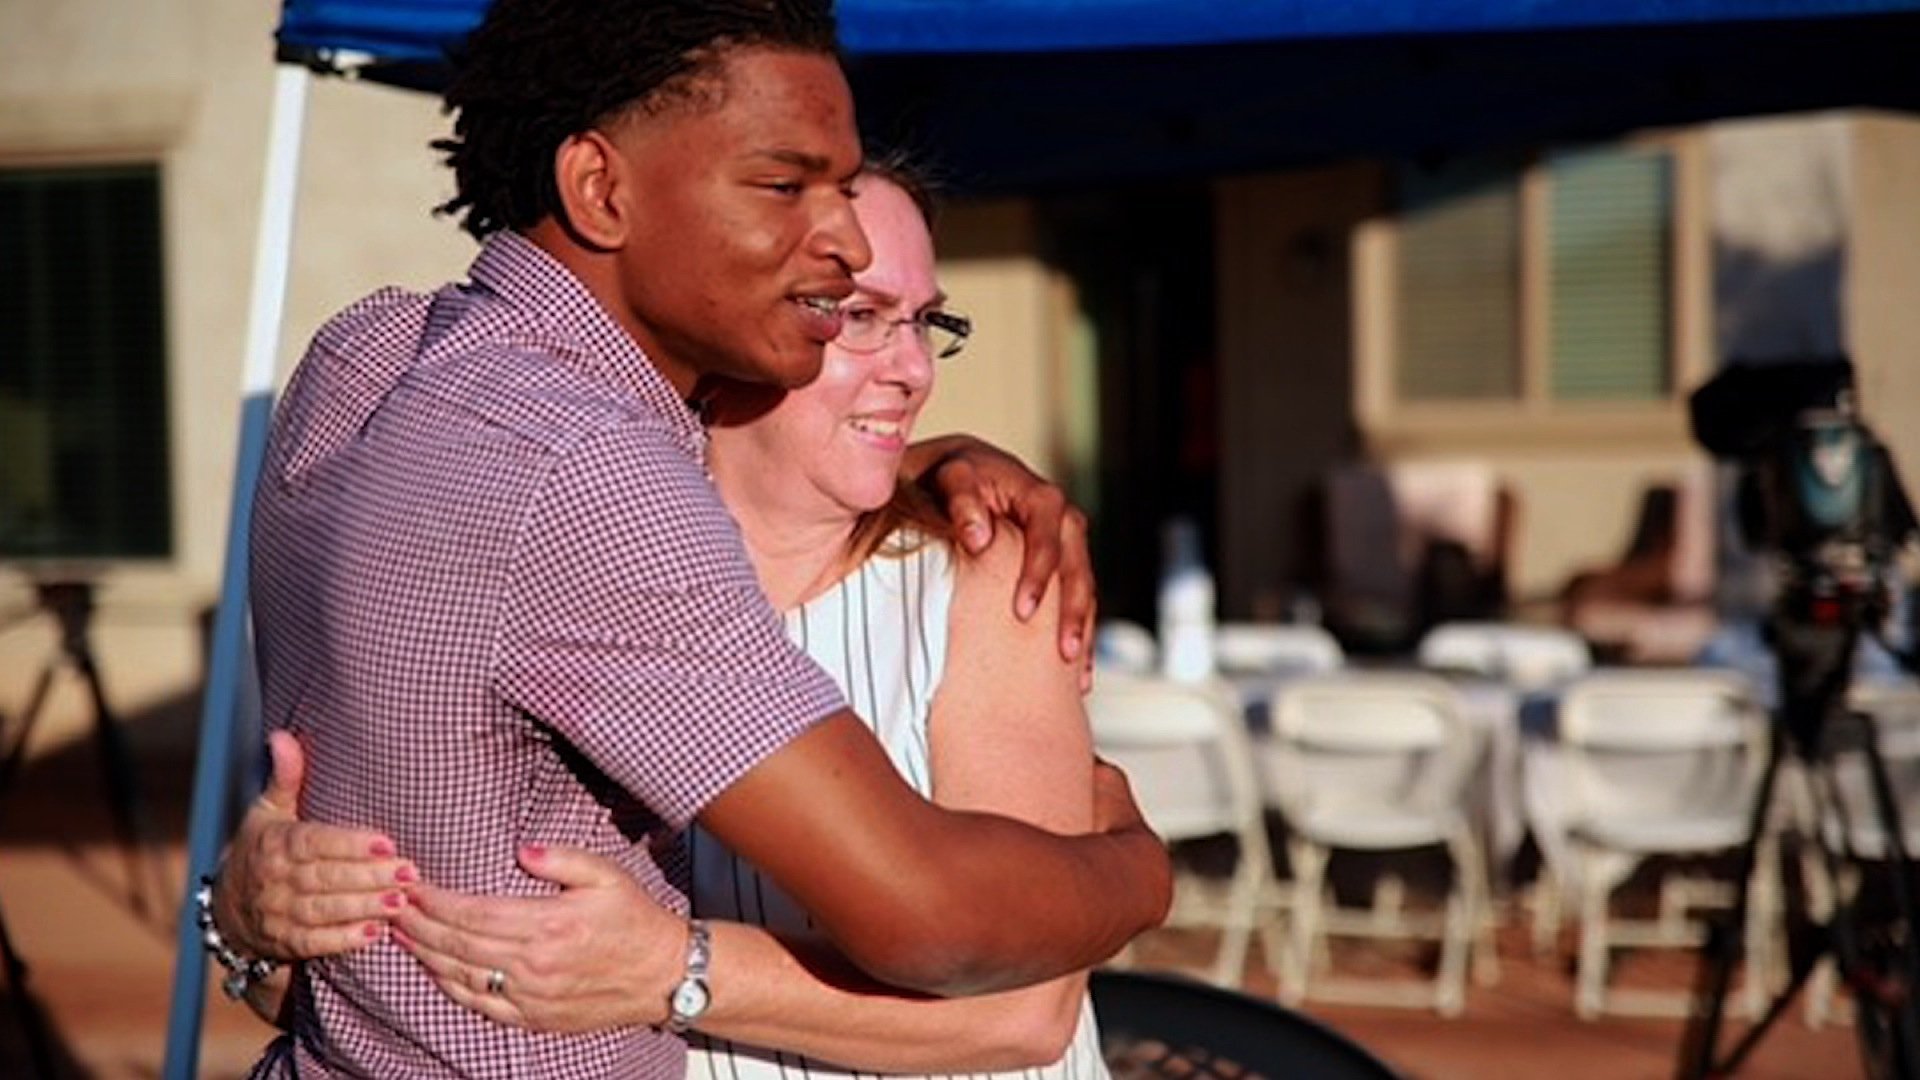 Wanda Dench accidentally invited a stranger to her Thanksgiving dinner via text message -- and remained true to her promise of hosting him. Jamal Hinton joined Dench and her family for dinner.